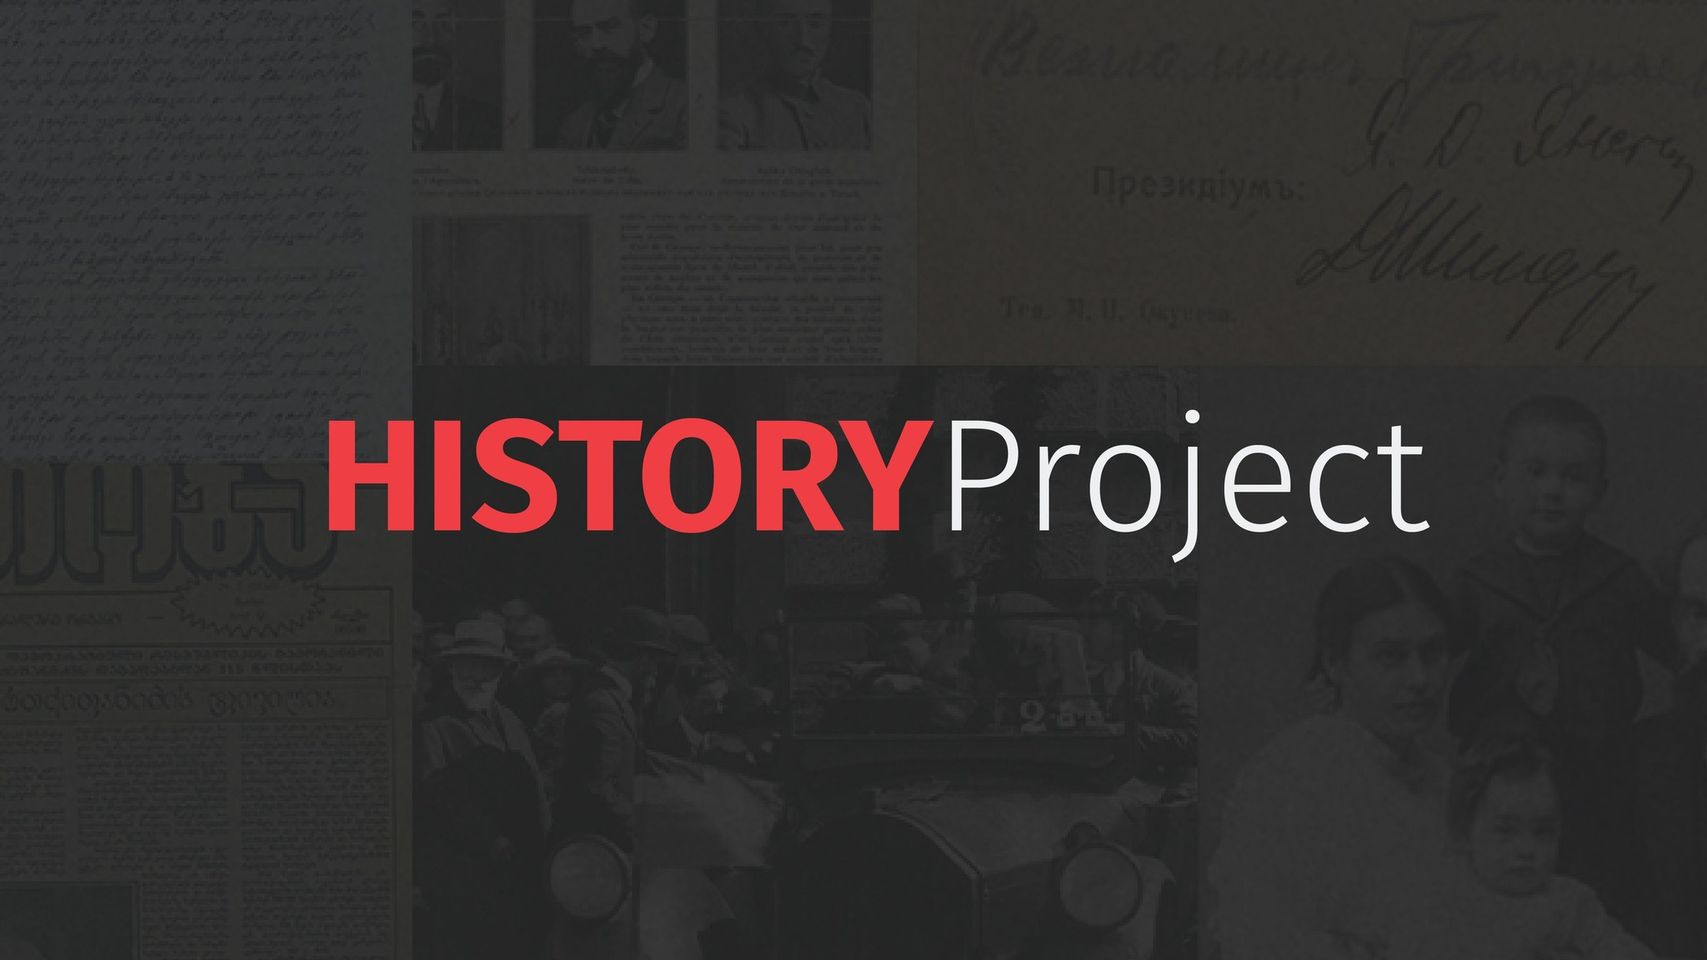 New website - www.historyproject.ge